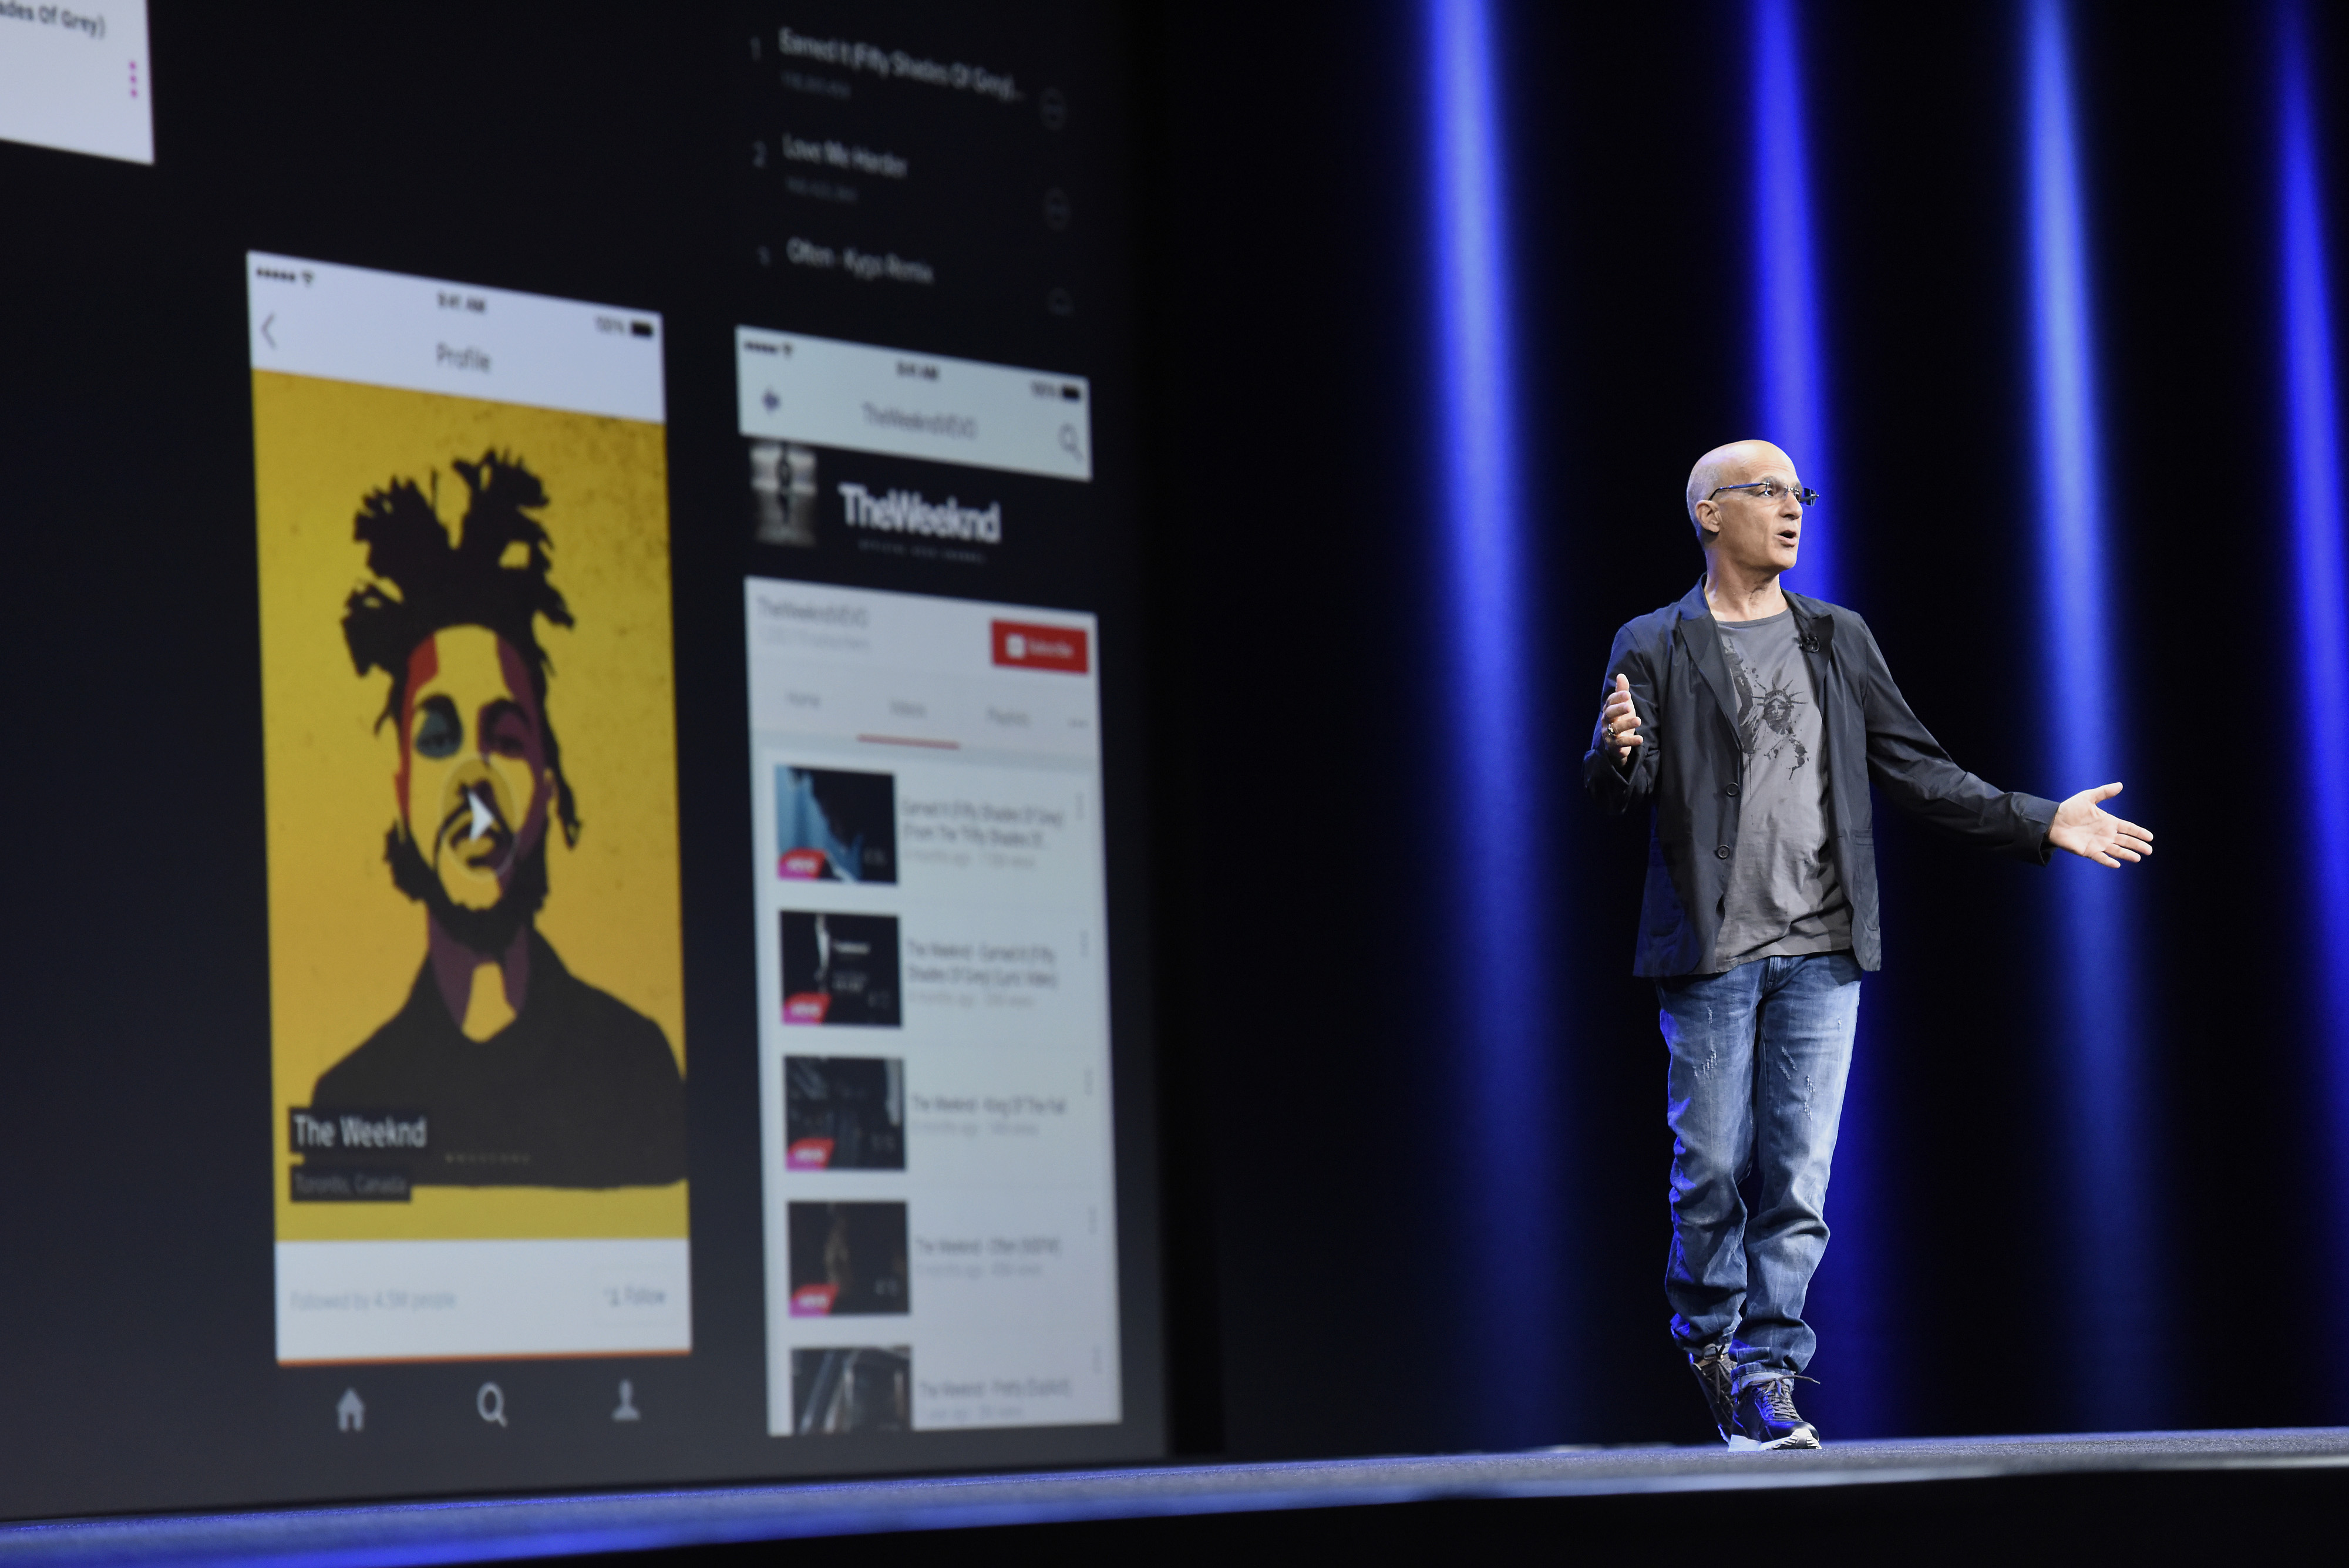 Jimmy Iovine, co-founder of Beats Electronics, speaks during the Apple World Wide Developers Conference (WWDC) in San Francisco, California, U.S., on Monday, June 8, 2015. (Bloomberg&mdash;Bloomberg via Getty Images)